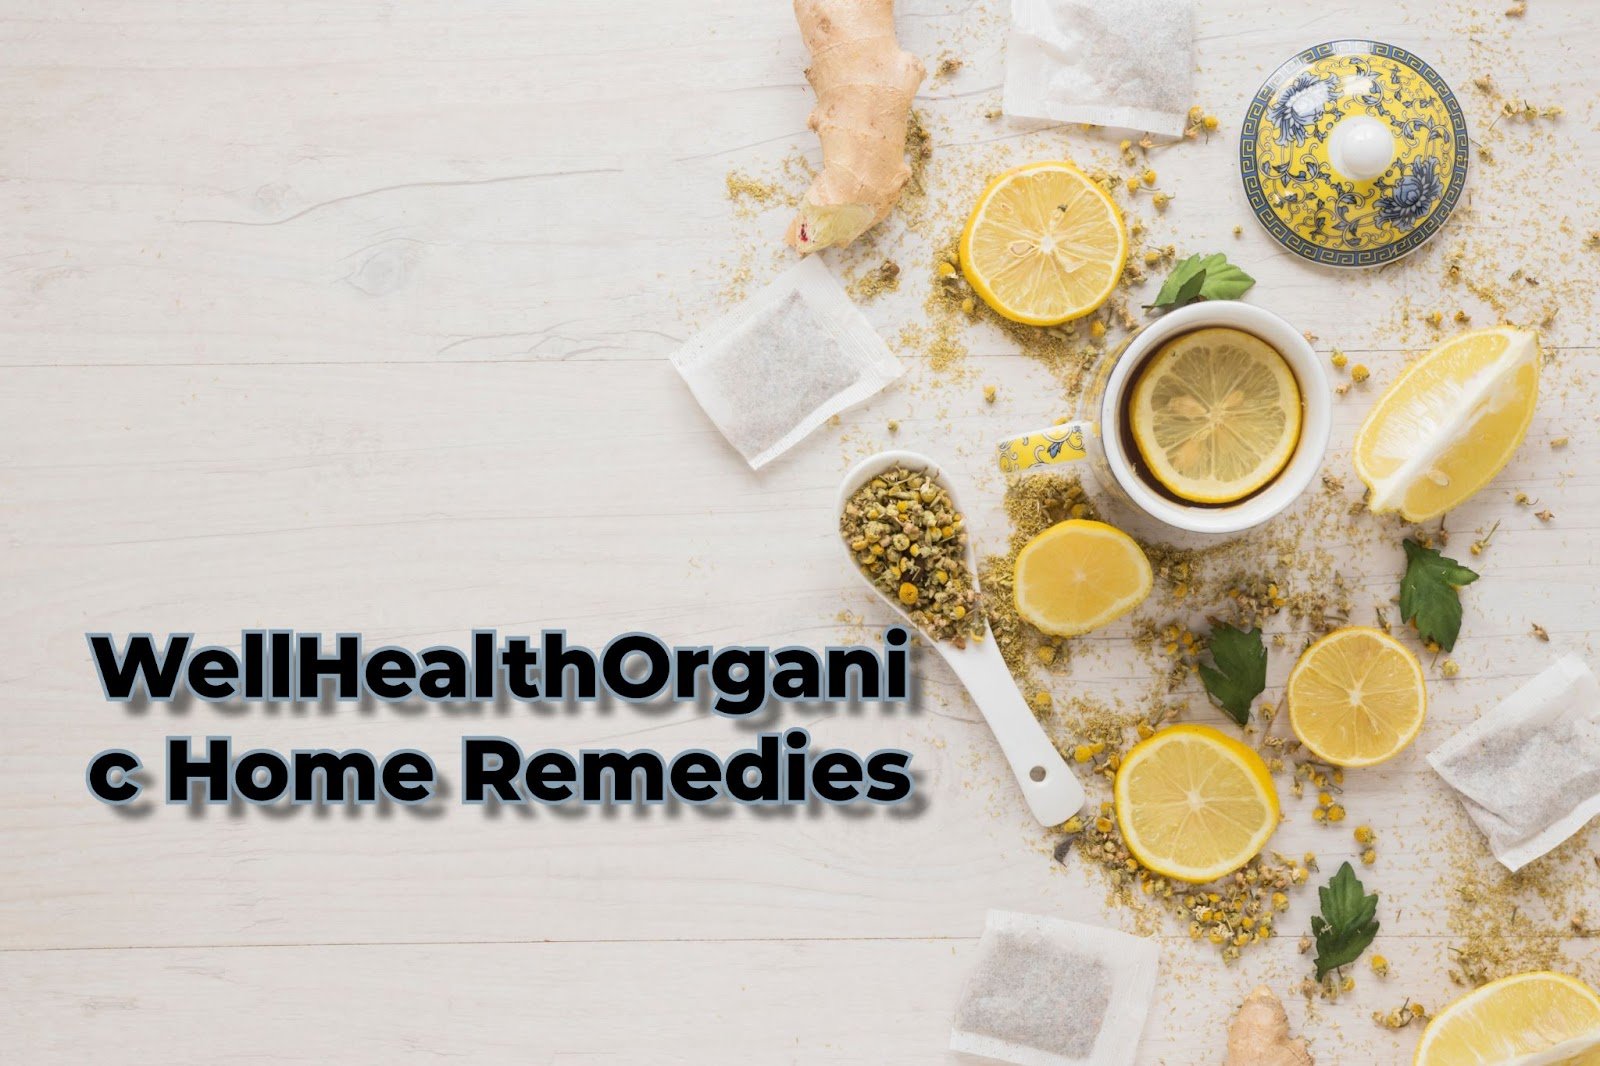 WellHealthOrganic Home Remedies: Natural Solutions for a Healthier Life